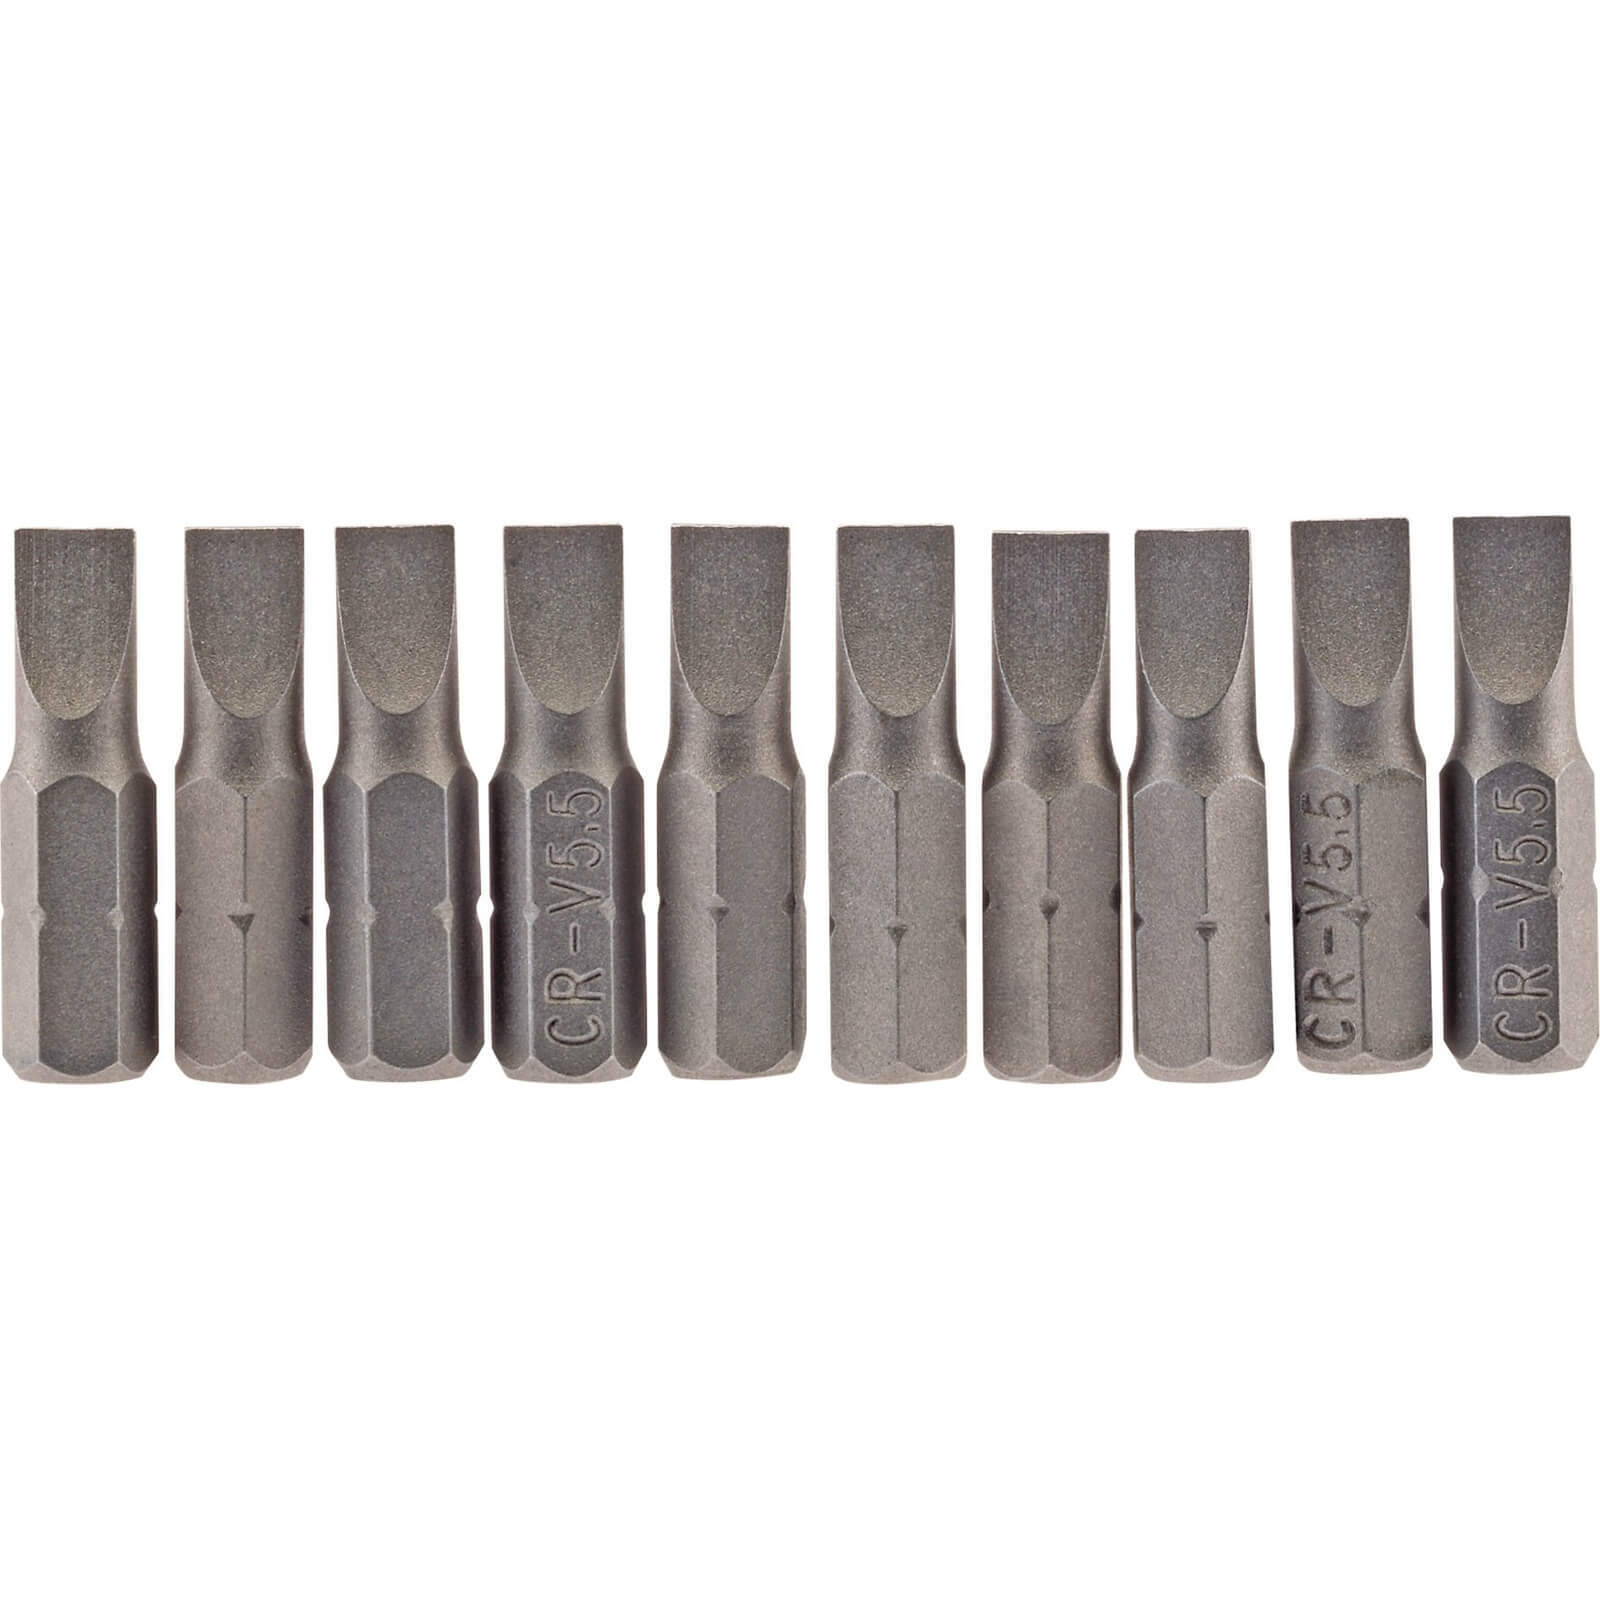 Image of Draper Slotted Screwdriver Bit 5.5mm 25mm Pack of 10